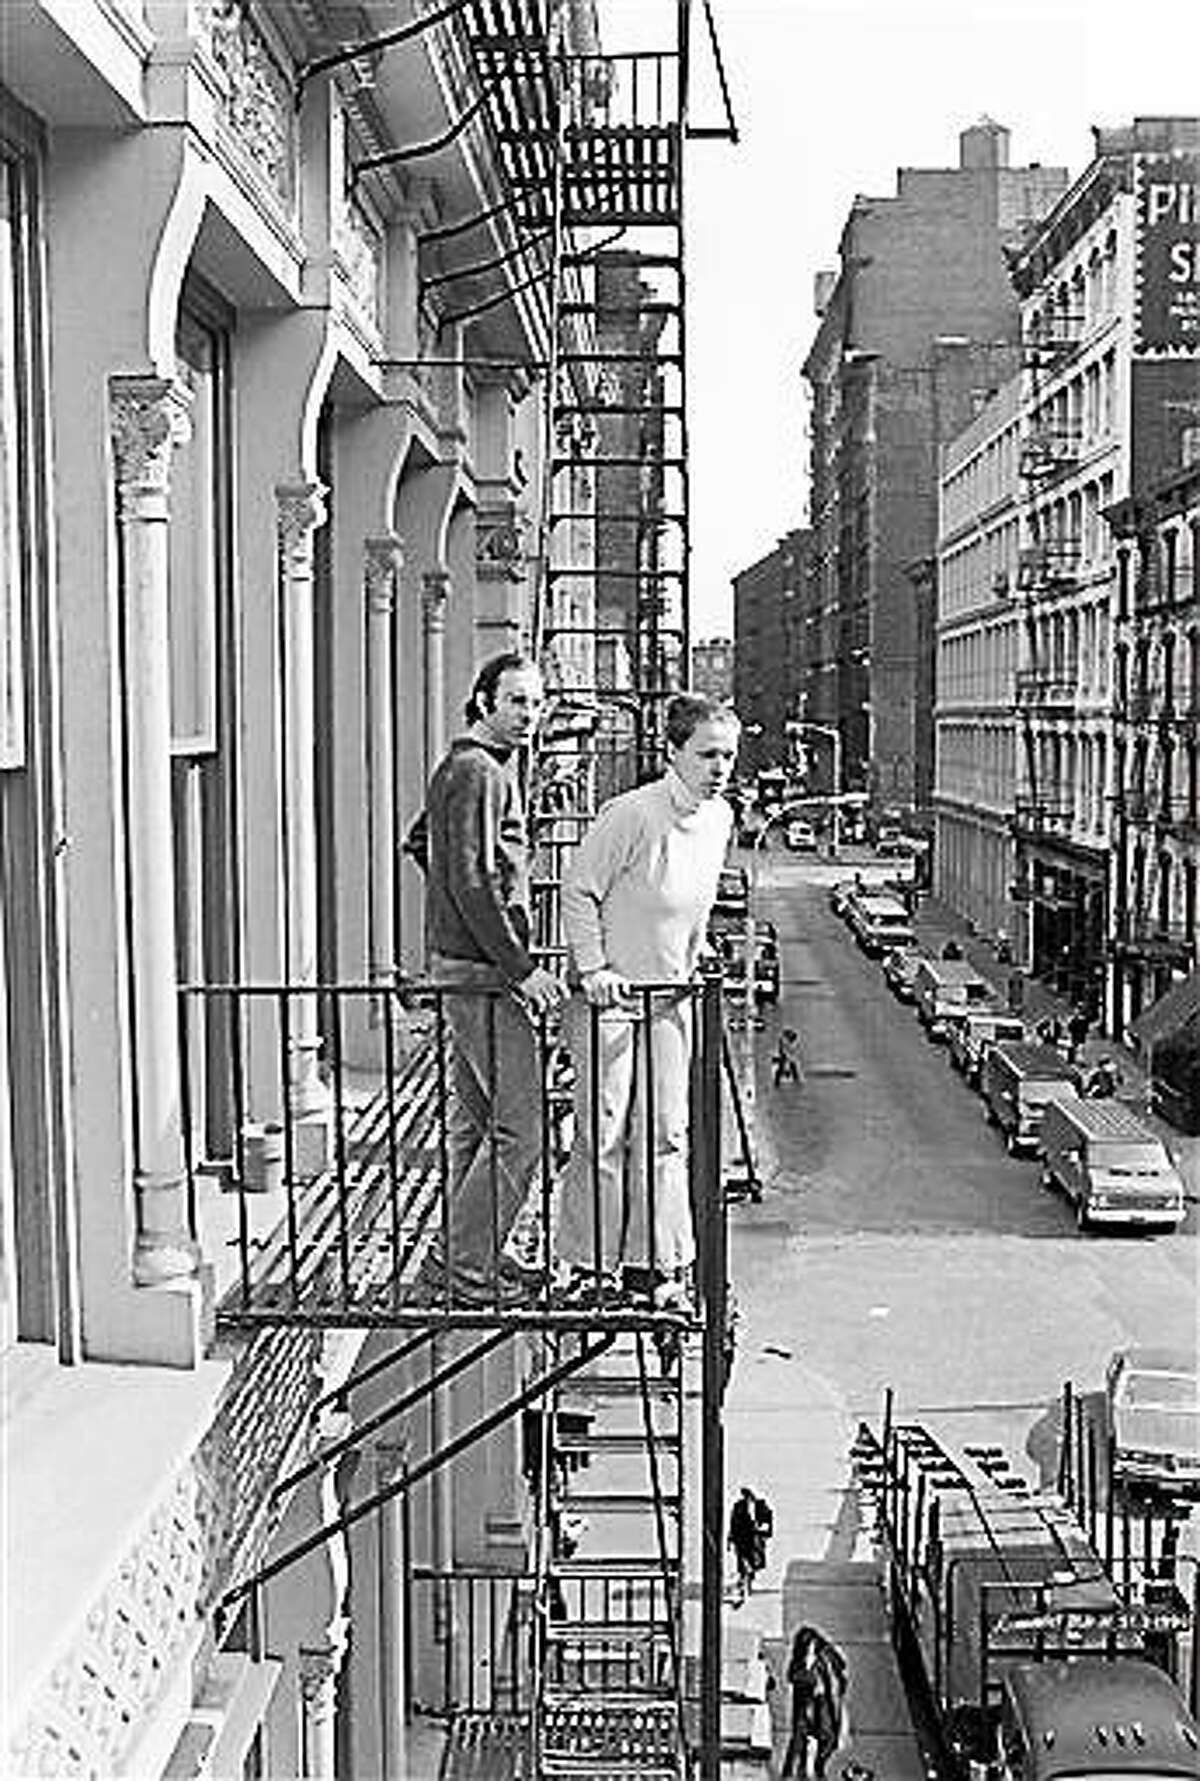 FILE - In this March 17, 1980, file photo, Stan and Julie Patz stand on the second-floor fire escape of the of their loft in the SoHo neighborhood of New York. Below them runs Prince Street, along which Etan, their 6-year-old son, set off to school on May 25, 1979, and has not been seen since. Pedro Hernandez, who worked in a nearby convenience store and is accused of killing Patz, told police 33 years after they boy's disappearance that he choked the 6-year-old and put the still-living boy into a plastic bag, boxed up the bag and left it on a street. Opening statements in Hernandez's trial are set for Friday, Jan. 30, 2015. (AP Photo/Marty Reichenthal, File)